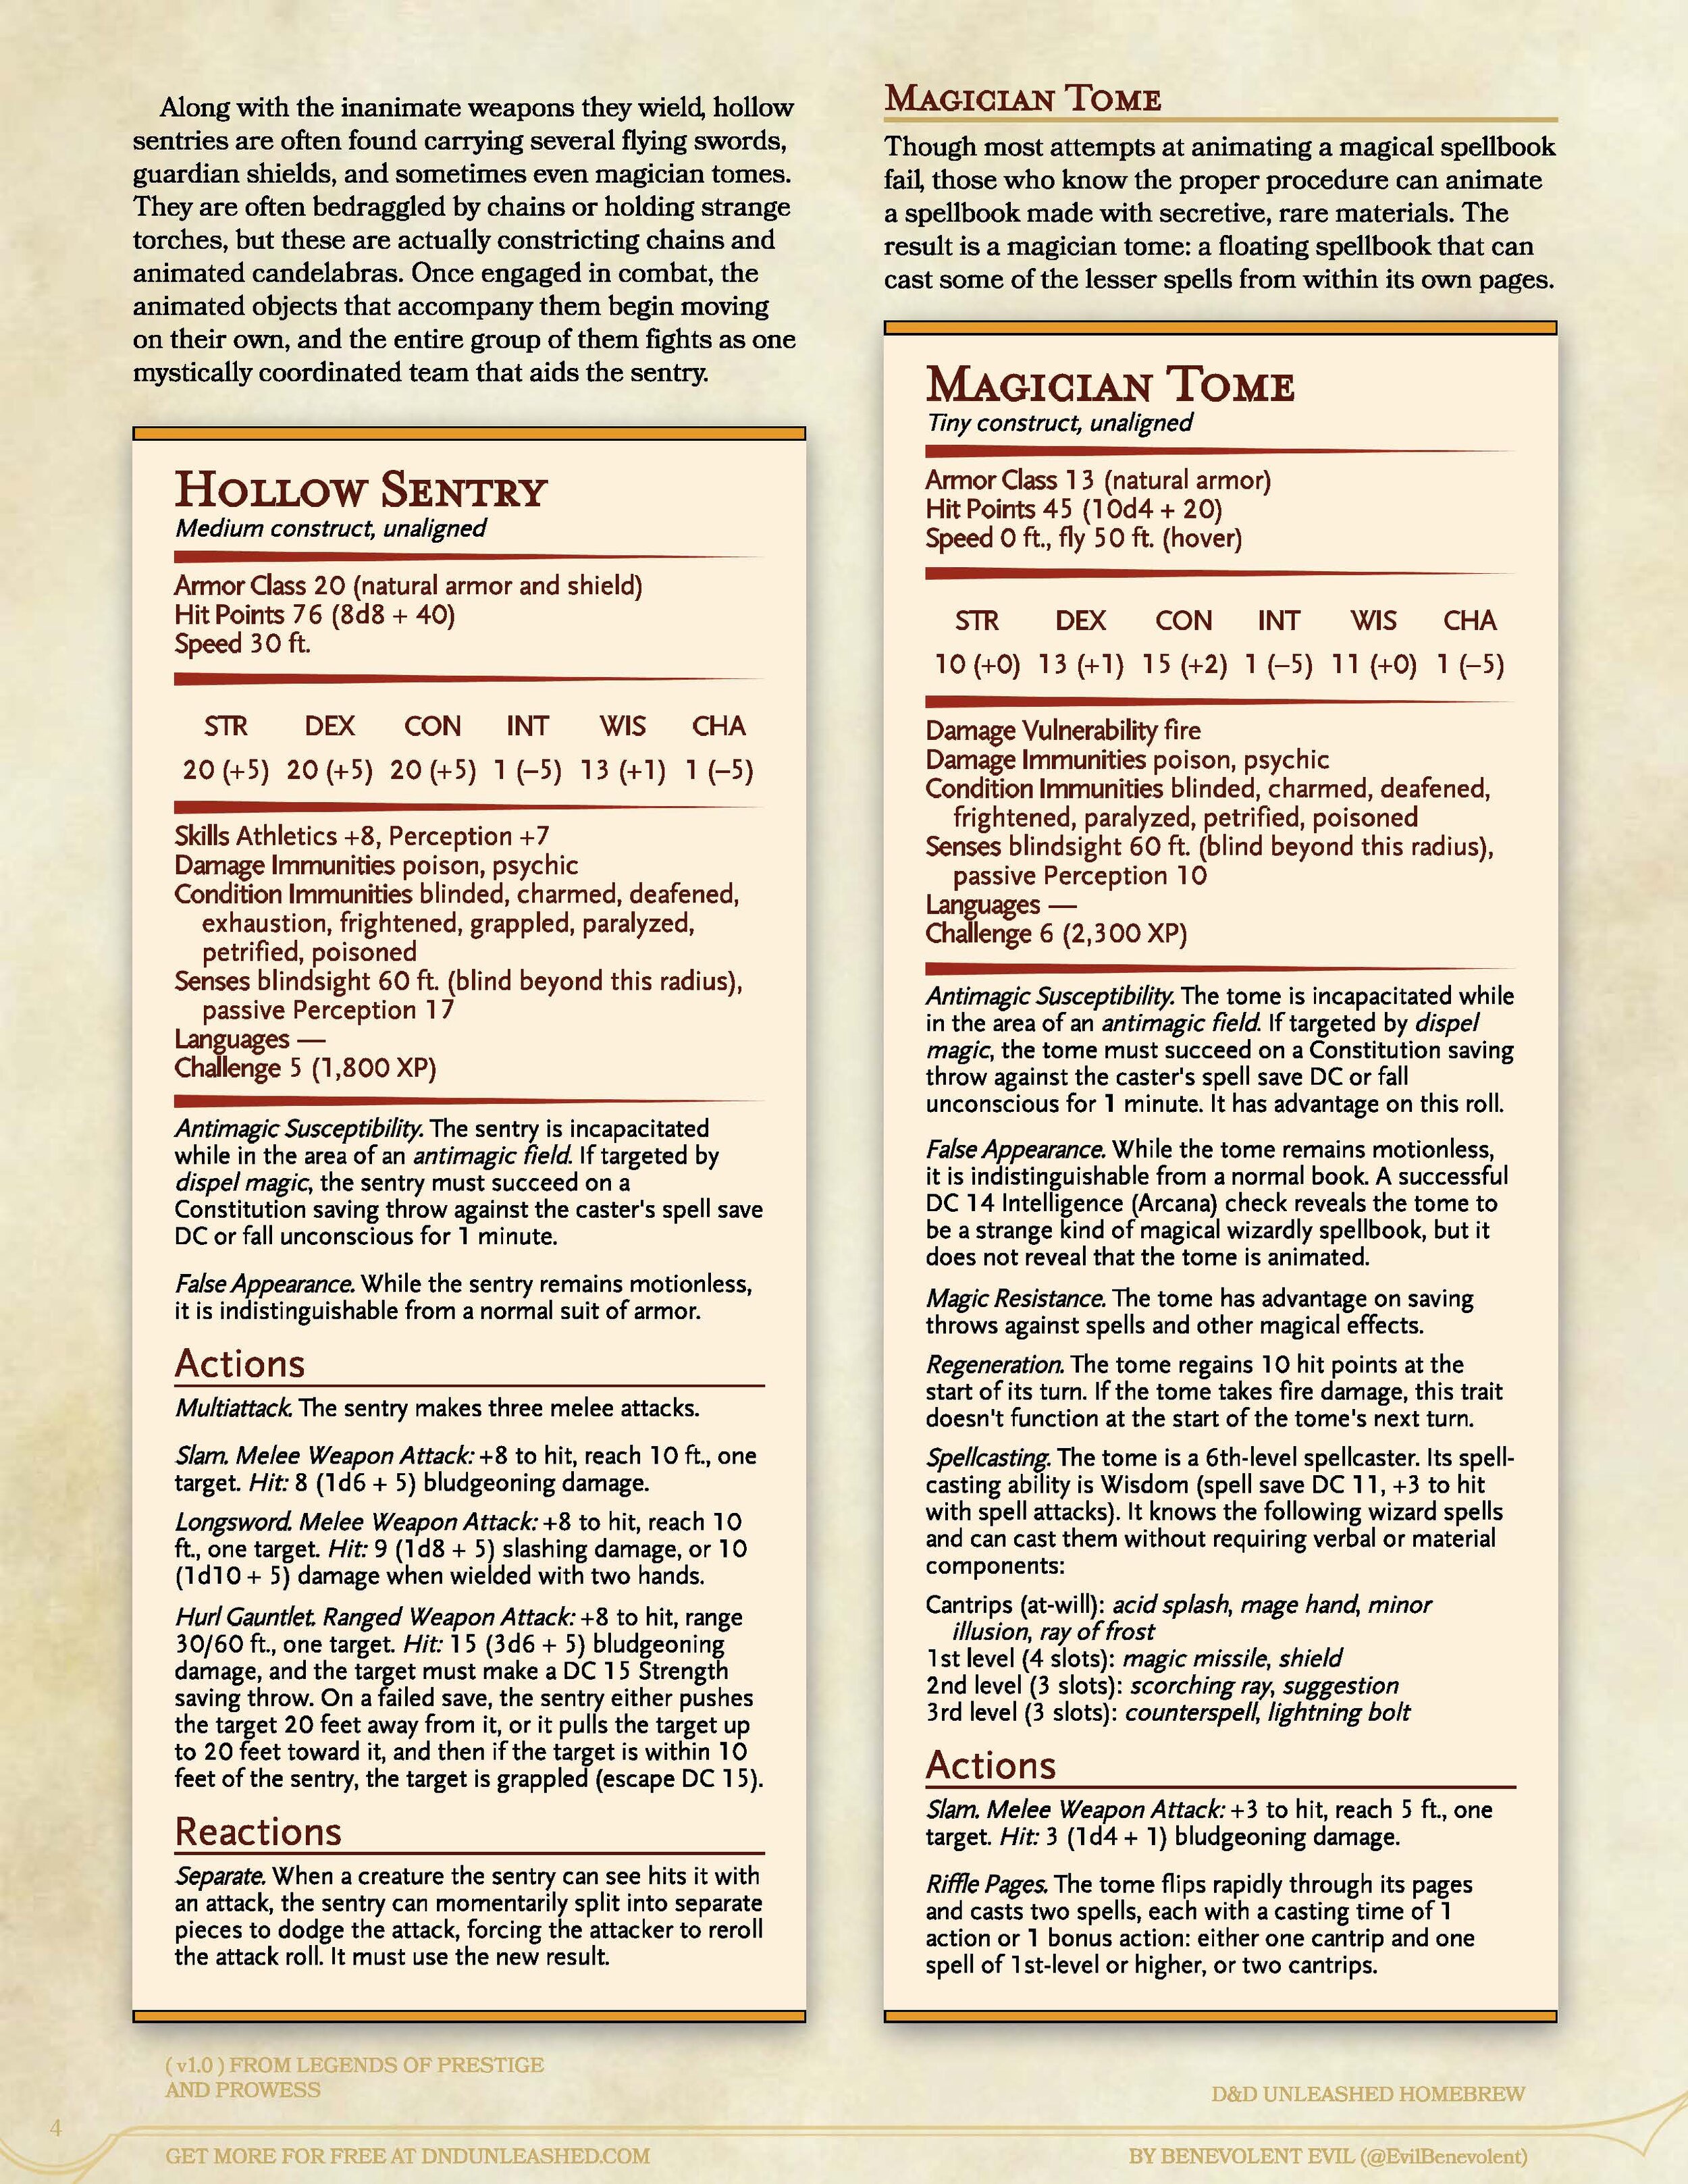 D&D Unleashed - New Animated Objects (1p0)_Page_4.jpg